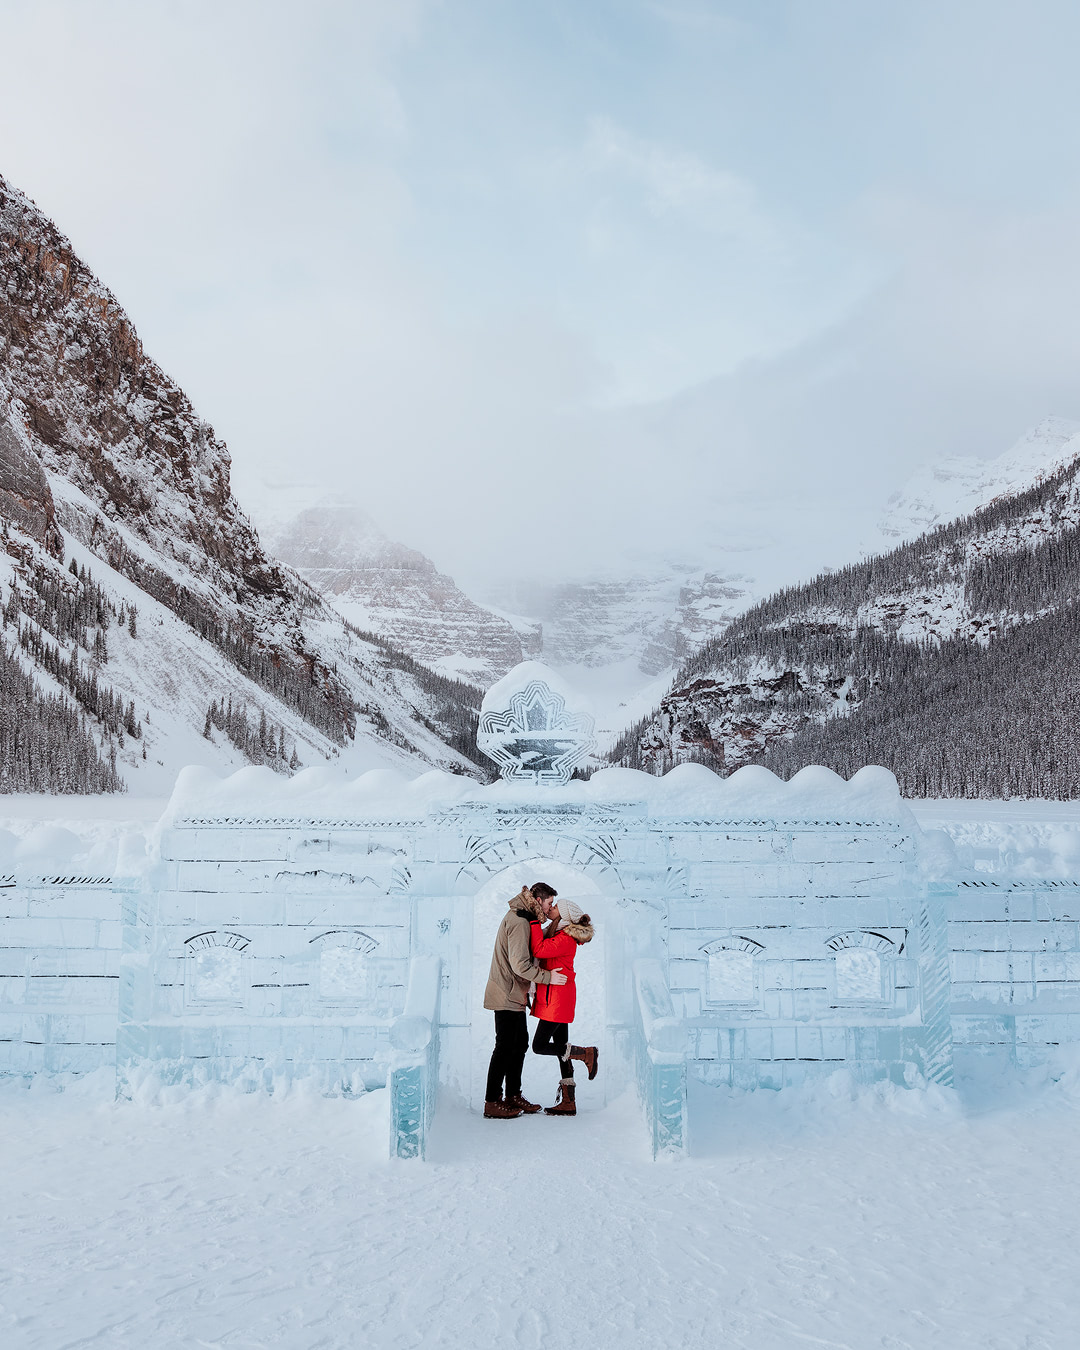 ULTIMATE WINTER TRAVEL GUIDE TO ALBERTA CANADA – 7 DAY ITINERARY - Renee Roaming 